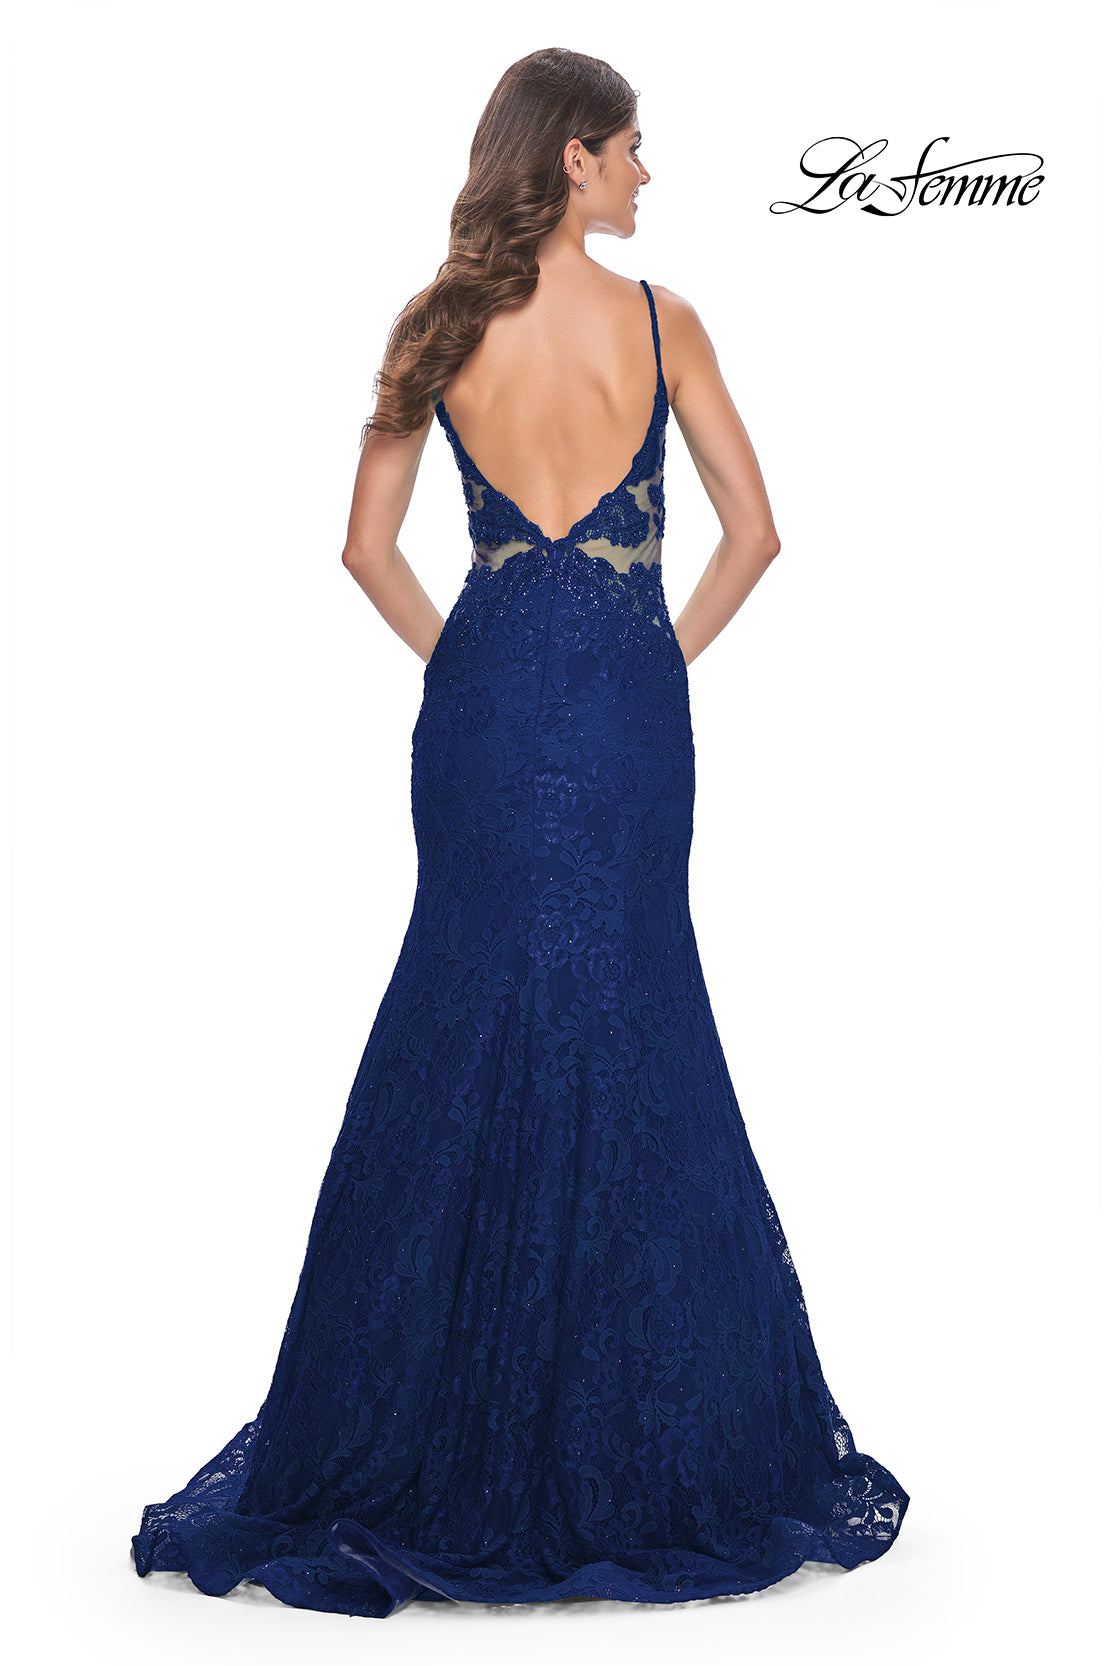 La-Femme-32315-Plunging-Neckline-Low-Back-Corset-Lace-Mermaid-Fitted-Navy-Evening-Dress-B-Chic-Fashions-Prom-Dress